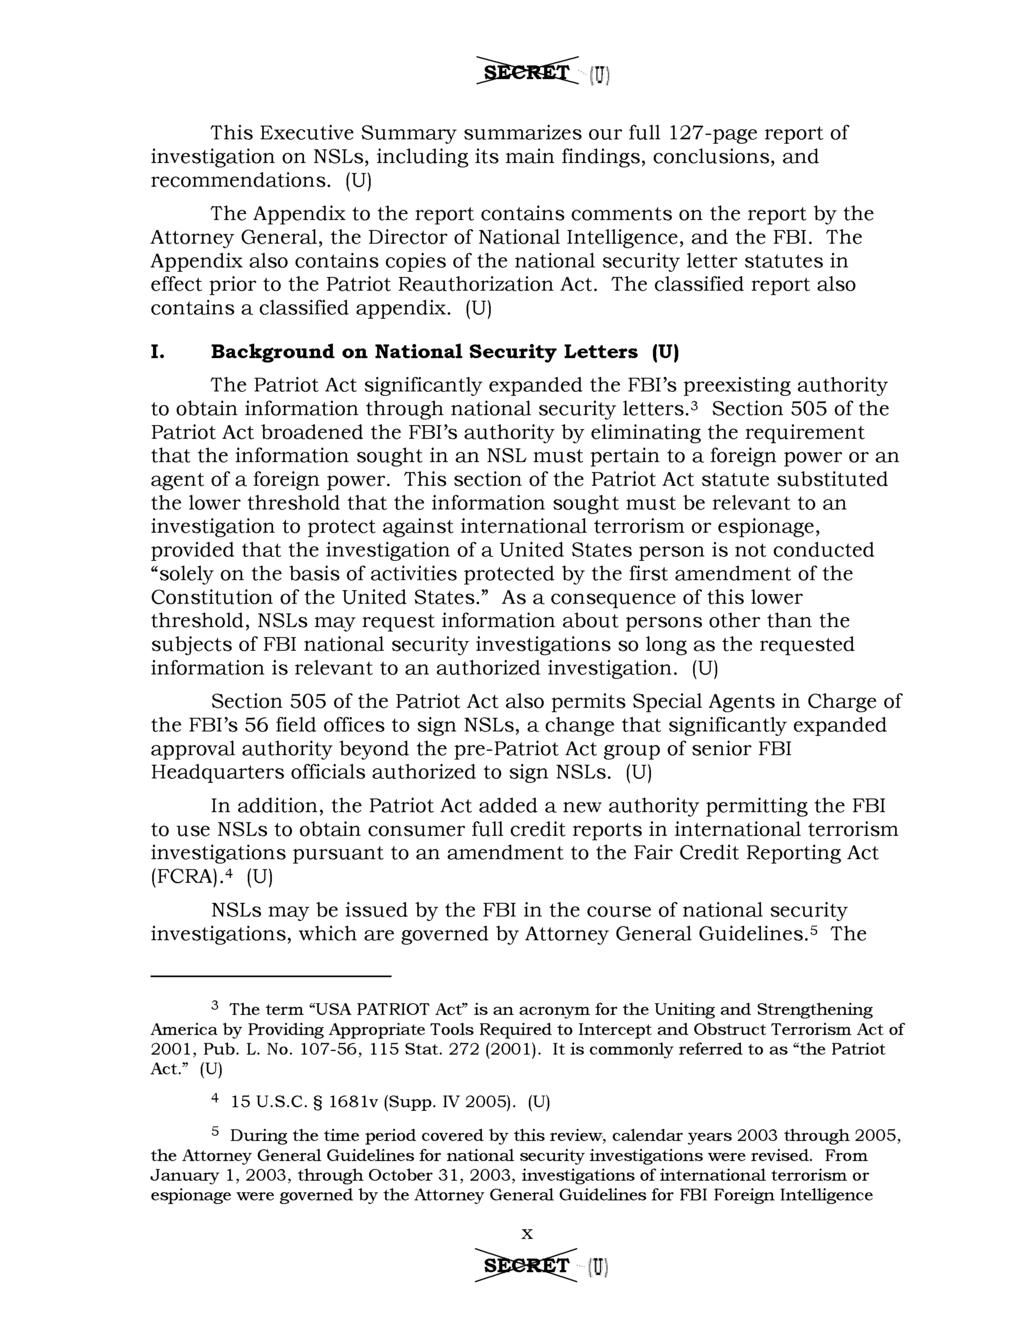 JsEeR^-fj) This Executive Summary summarizes our full 127-page report of investigation on NSLs, including its main findings, conclusions, and recommendations.